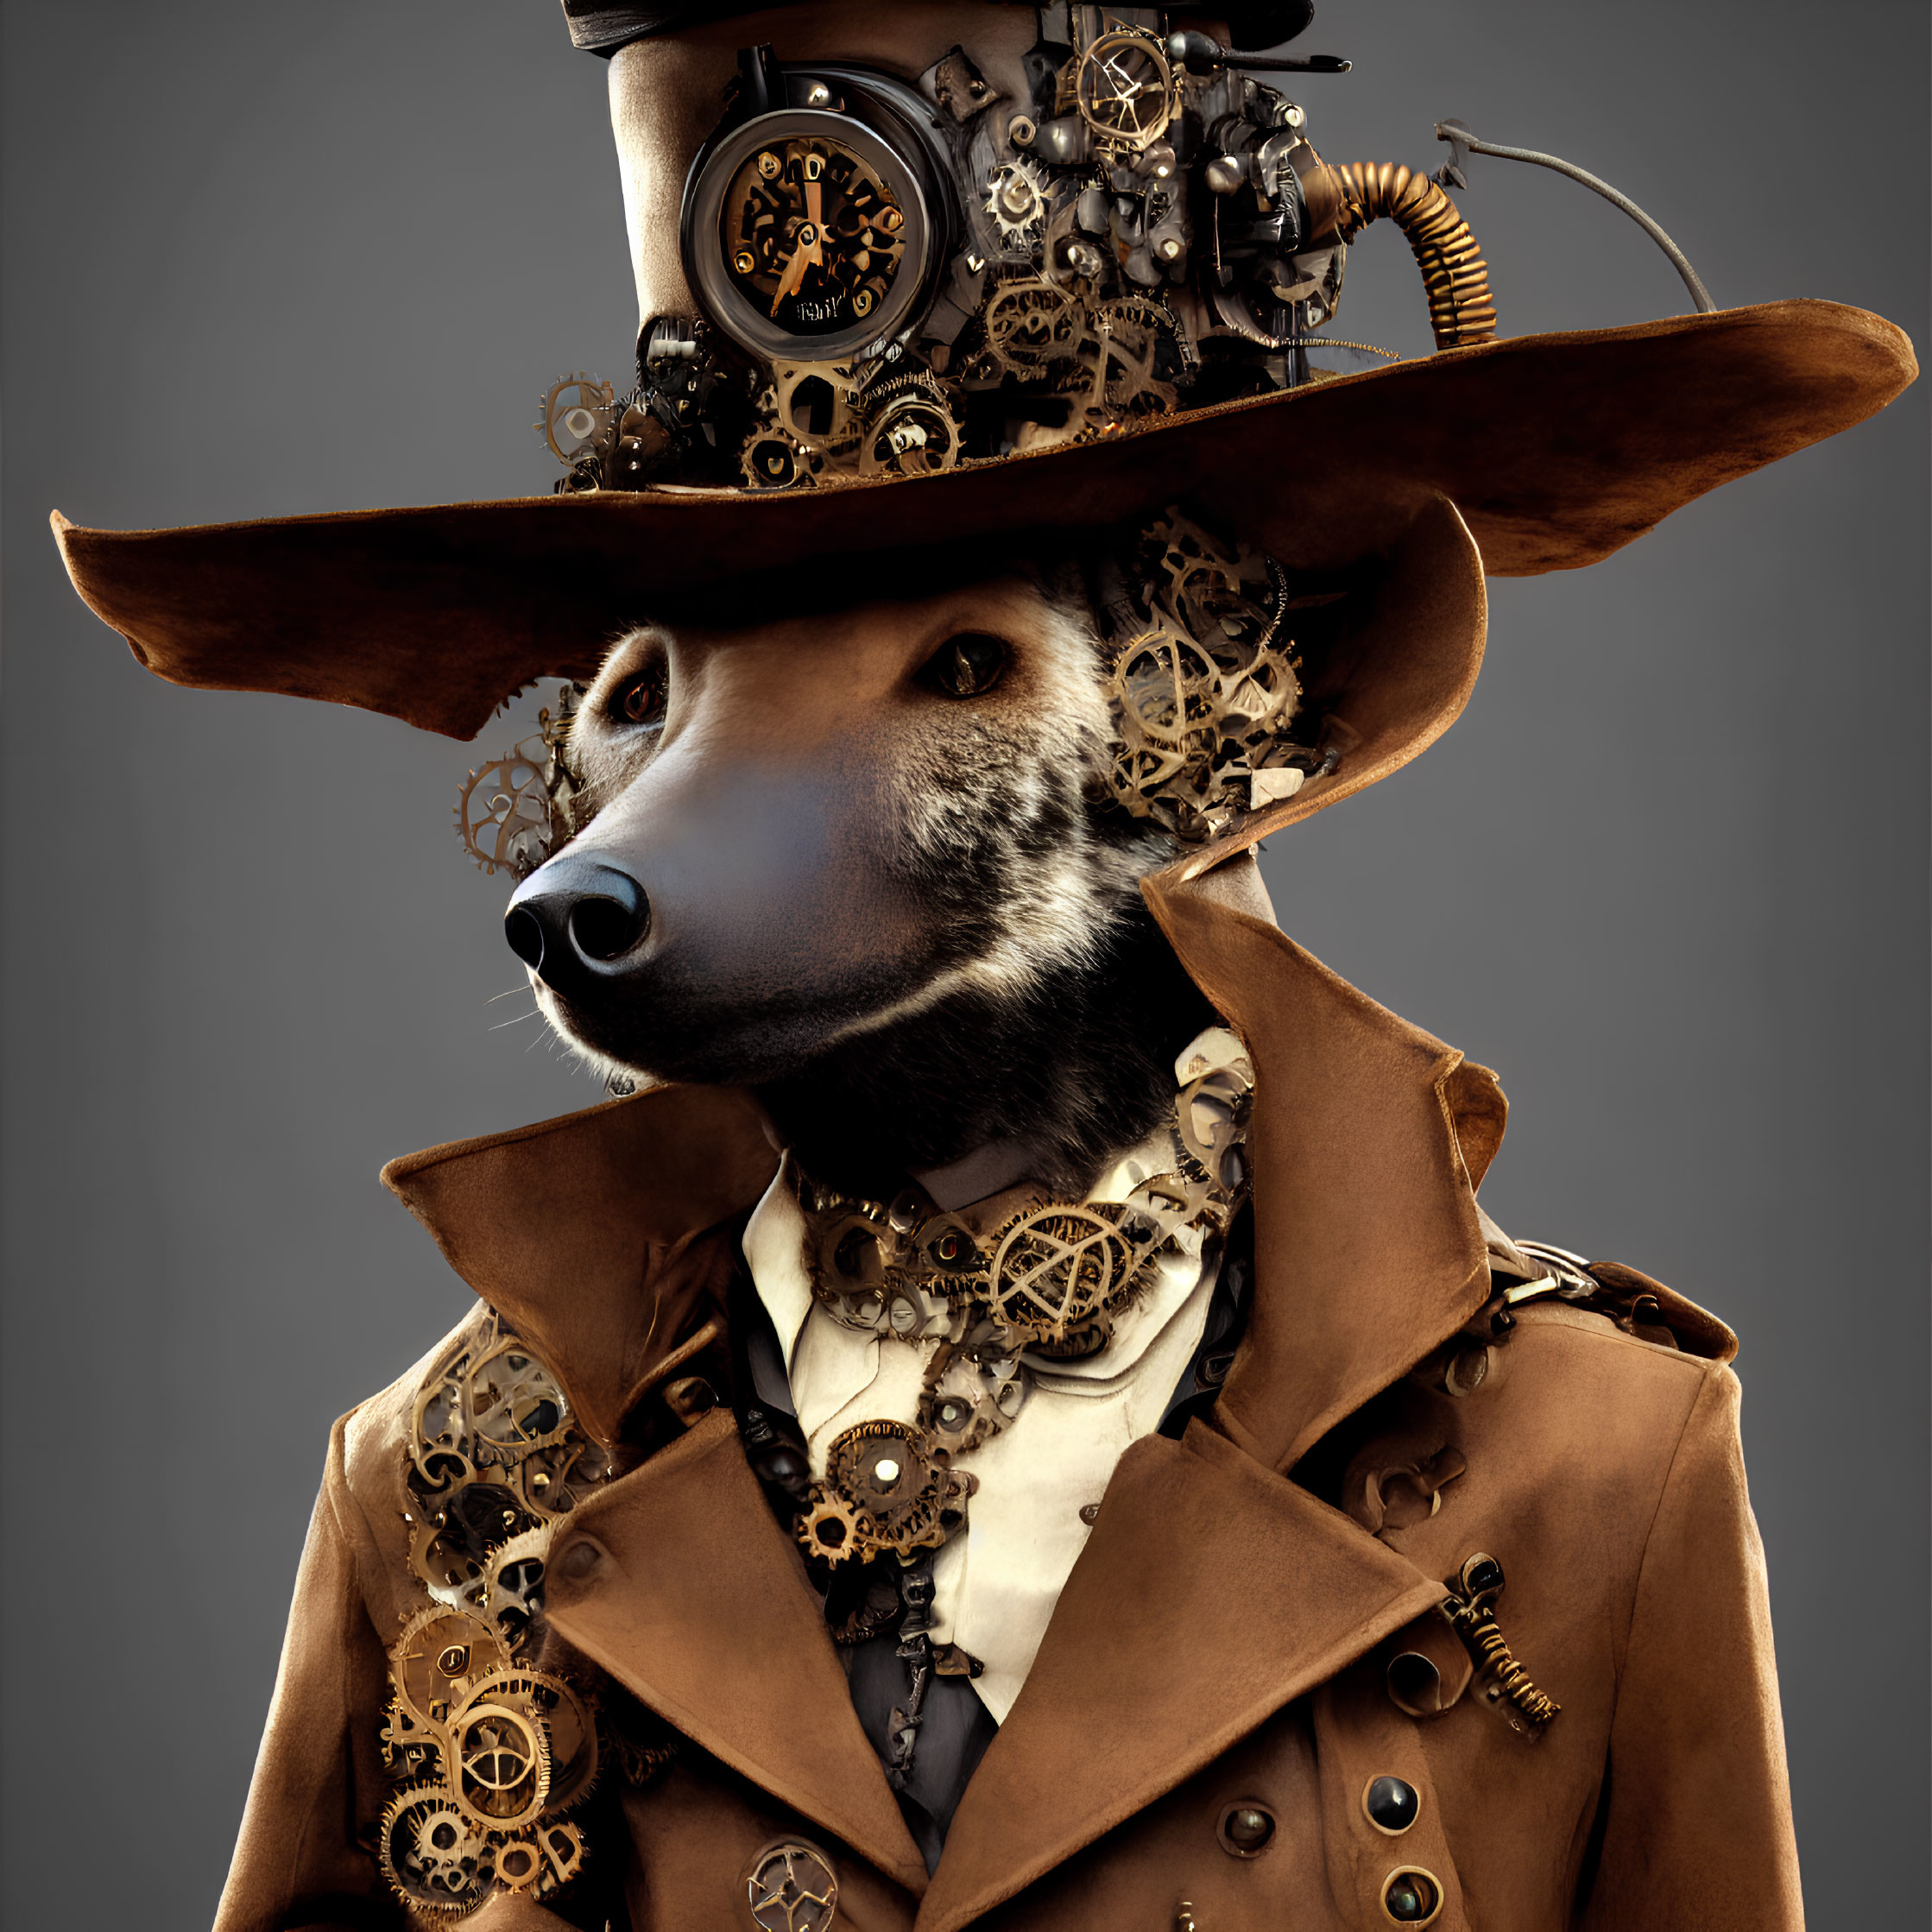 Steampunk-themed dog character with gear embellishments and top hat in brown trench coat